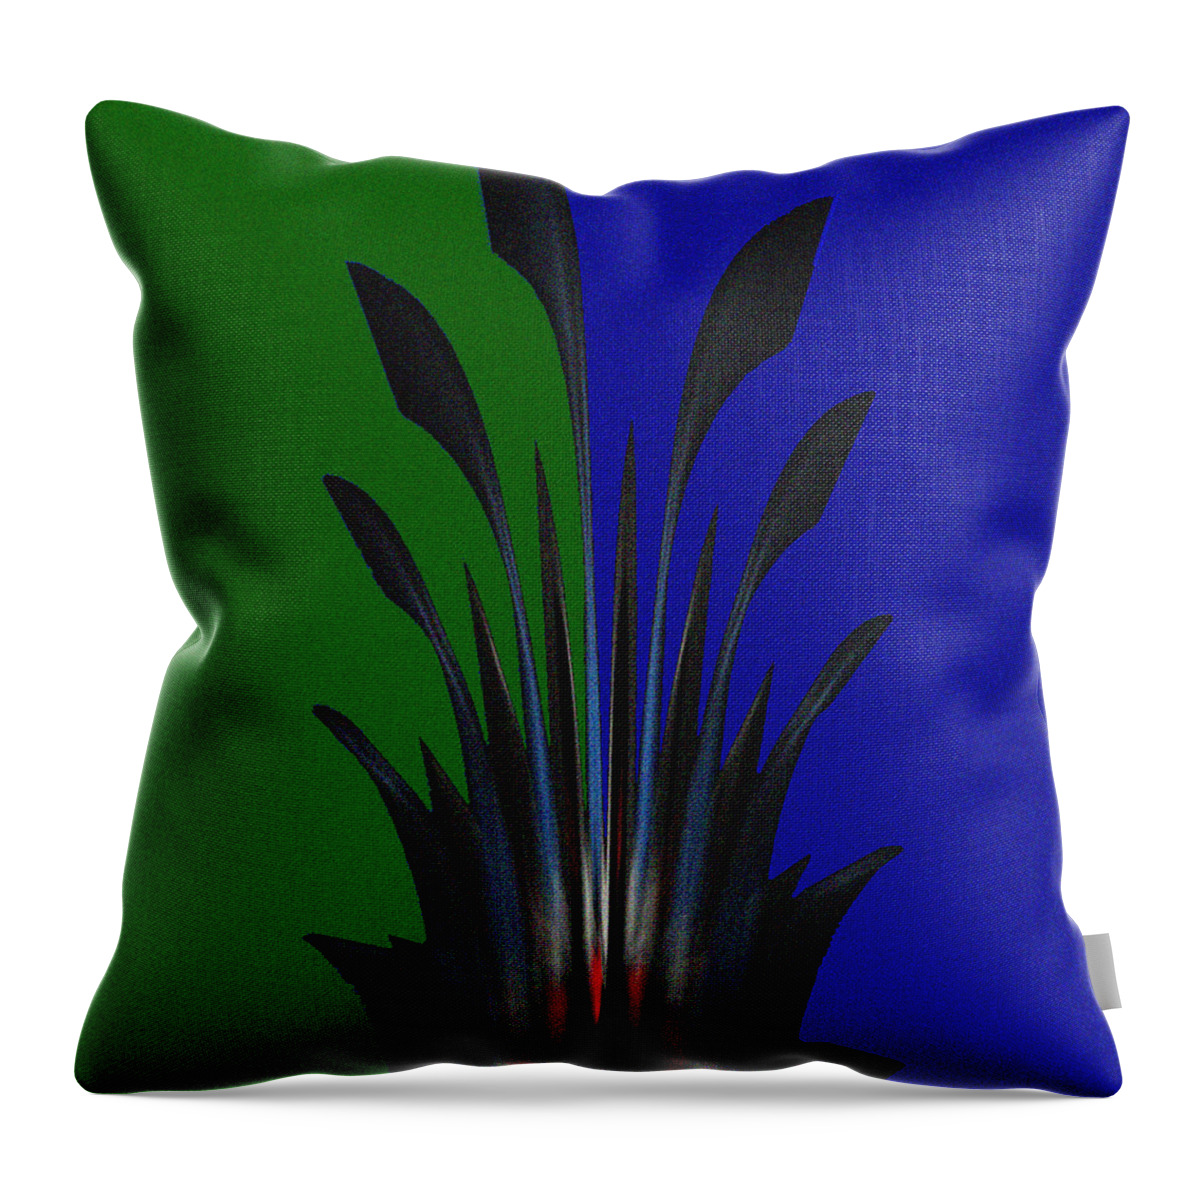 Digital Throw Pillow featuring the digital art Pineapple Top No.1 by Ronald Mills